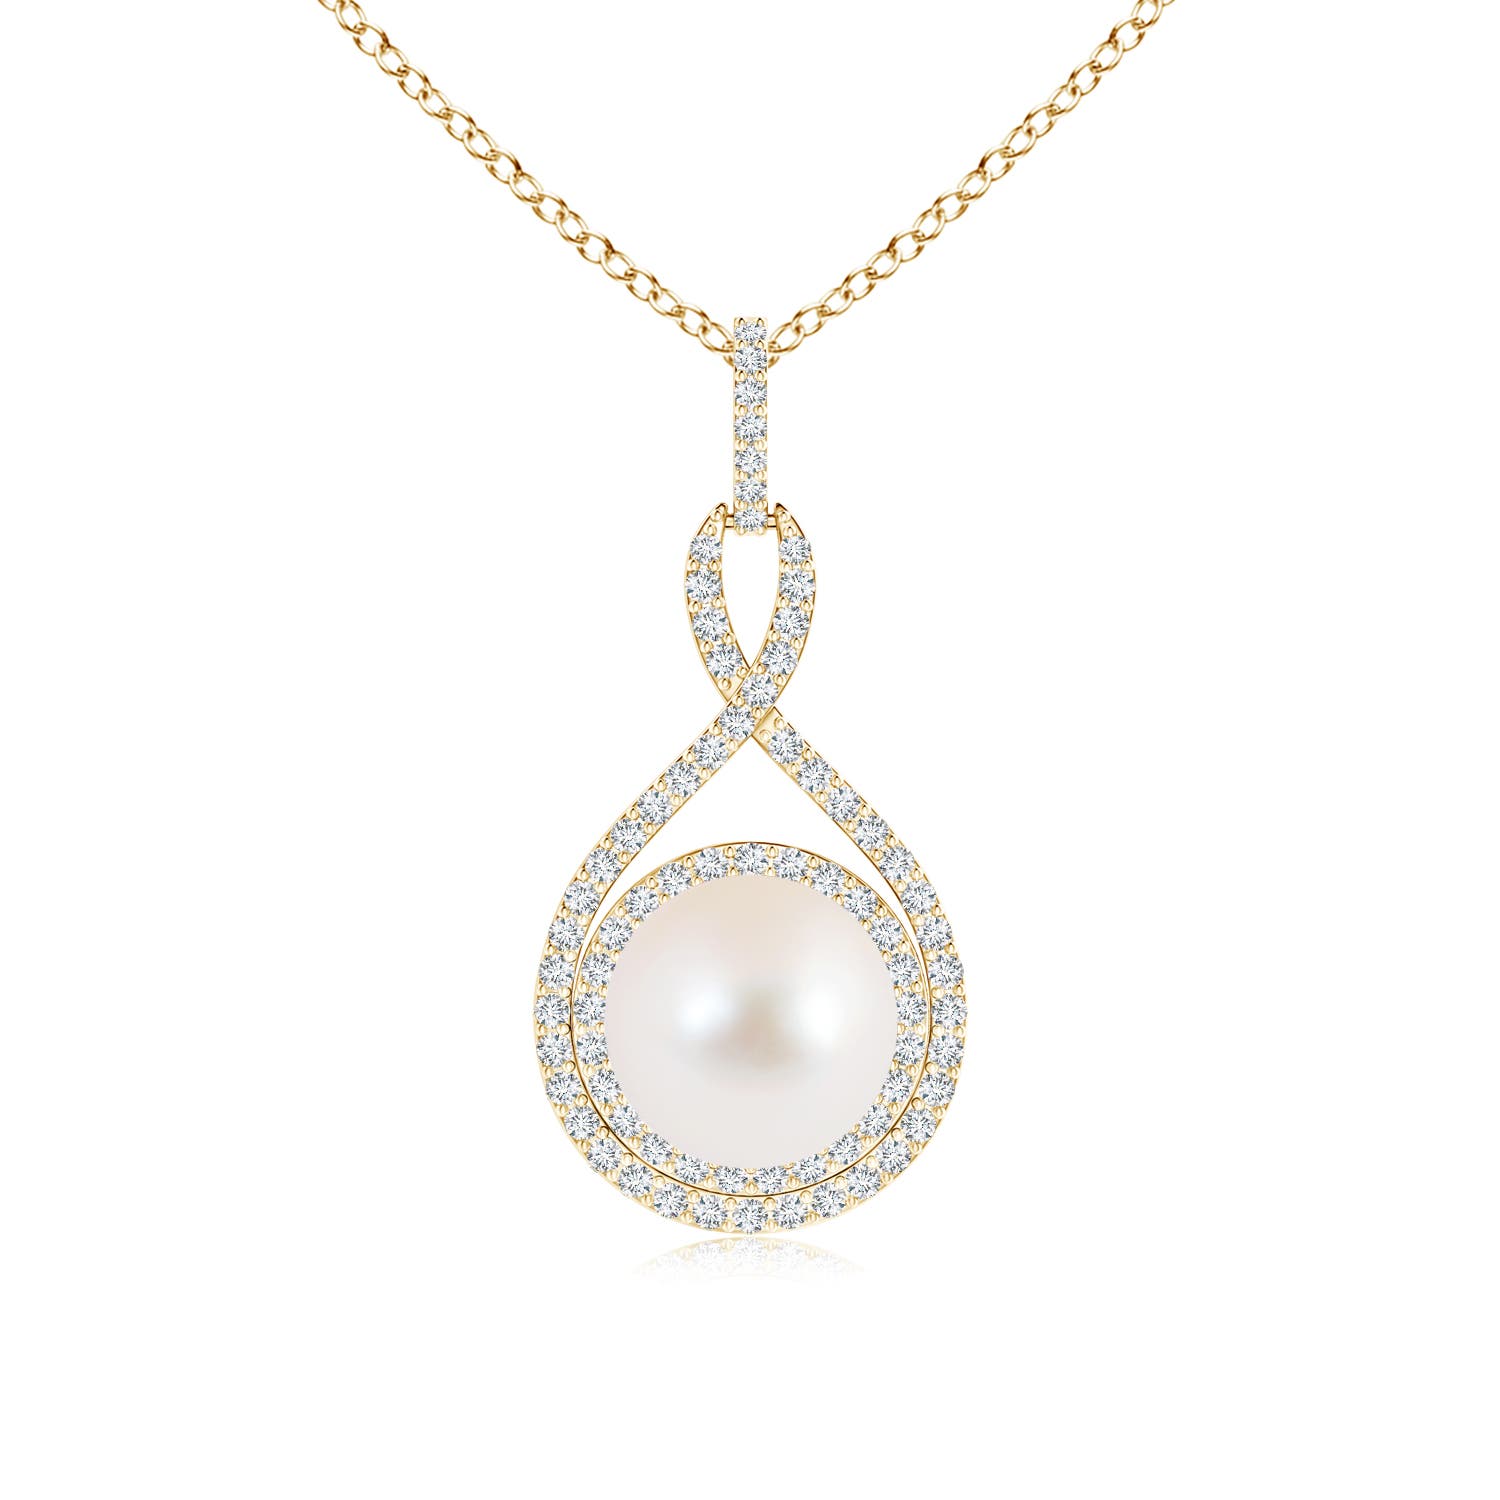 AAA - Freshwater Cultured Pearl / 5.69 CT / 14 KT Yellow Gold